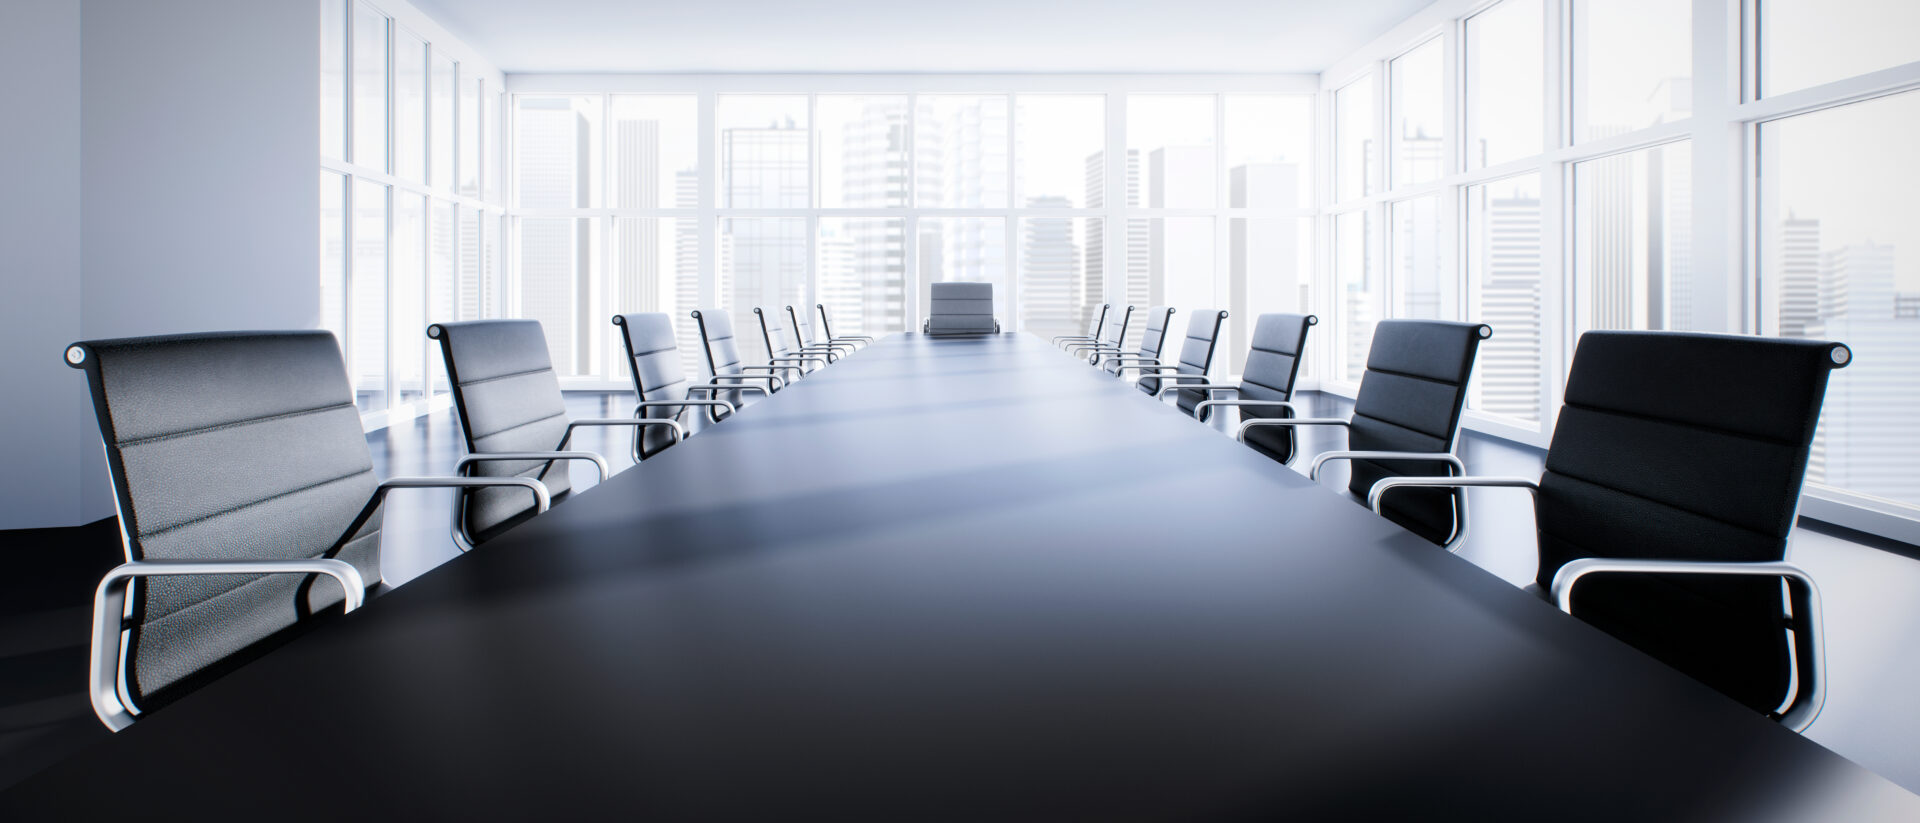 A large conference table with chairs around it.